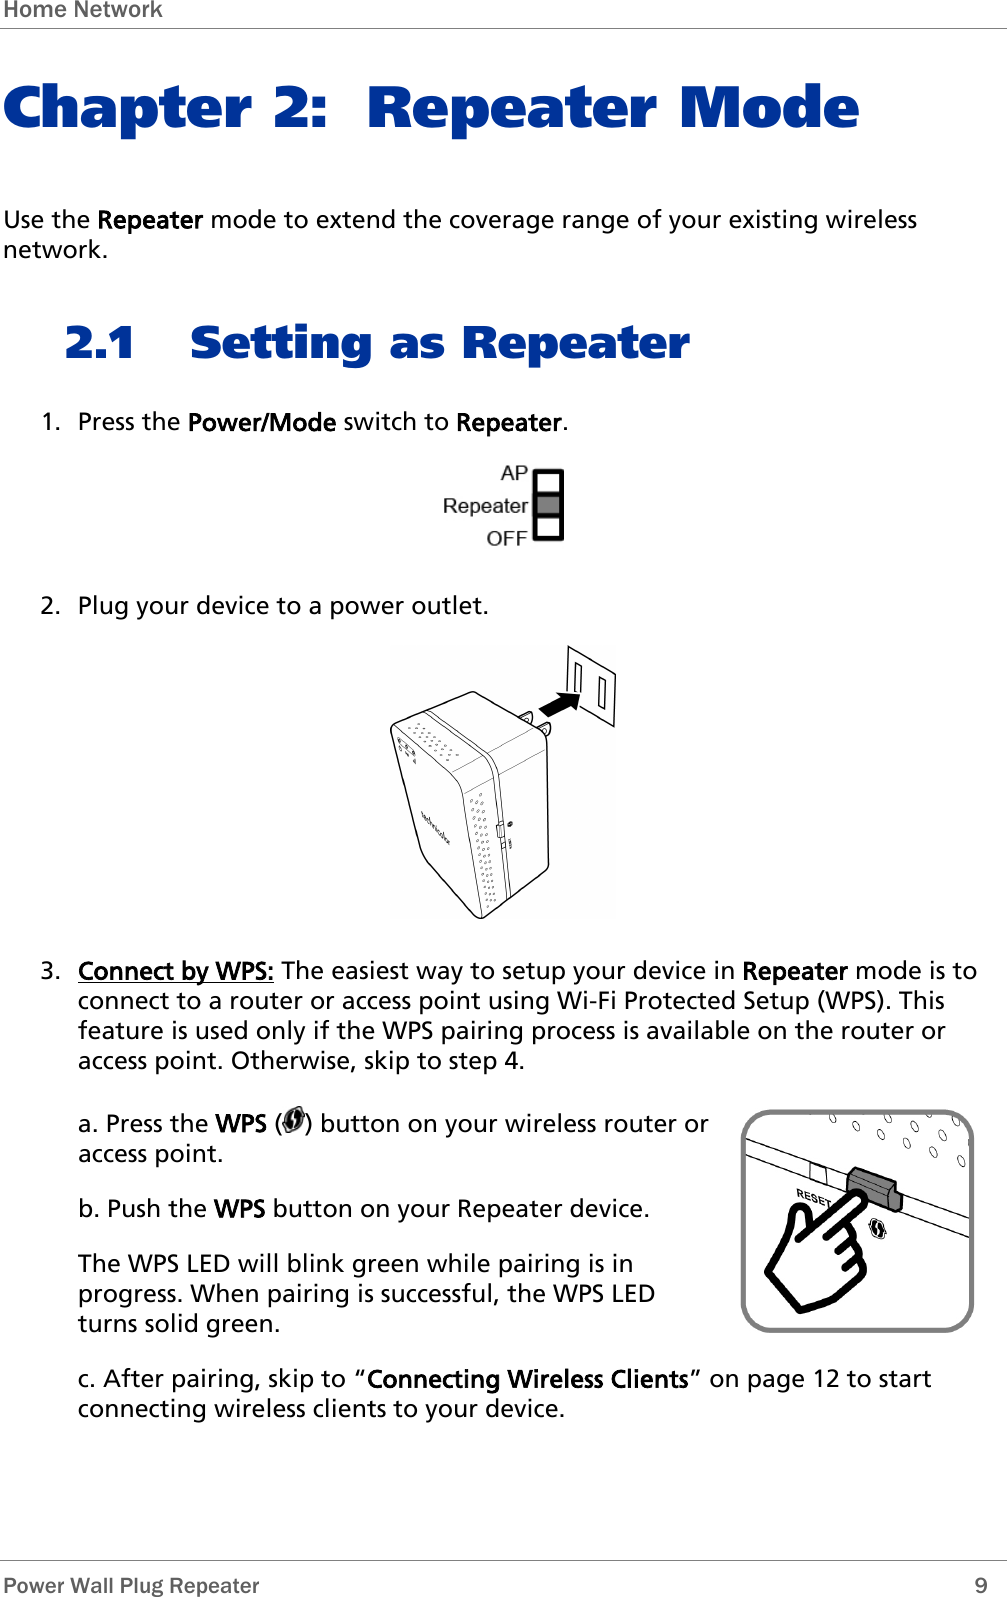 Home Network   Power Wall Plug Repeater        9 Chapter 2: Repeater Mode Use the Repeater mode to extend the coverage range of your existing wireless network. 2.1 Setting as Repeater 1. Press the Power/Mode switch to Repeater.  2. Plug your device to a power outlet.  3. Connect by WPS: The easiest way to setup your device in Repeater mode is to connect to a router or access point using Wi-Fi Protected Setup (WPS). This feature is used only if the WPS pairing process is available on the router or access point. Otherwise, skip to step 4.  a. Press the WPS ( ) button on your wireless router or access point. b. Push the WPS button on your Repeater device. The WPS LED will blink green while pairing is in progress. When pairing is successful, the WPS LED turns solid green.  c. After pairing, skip to “Connecting Wireless Clients” on page 12 to start connecting wireless clients to your device. 